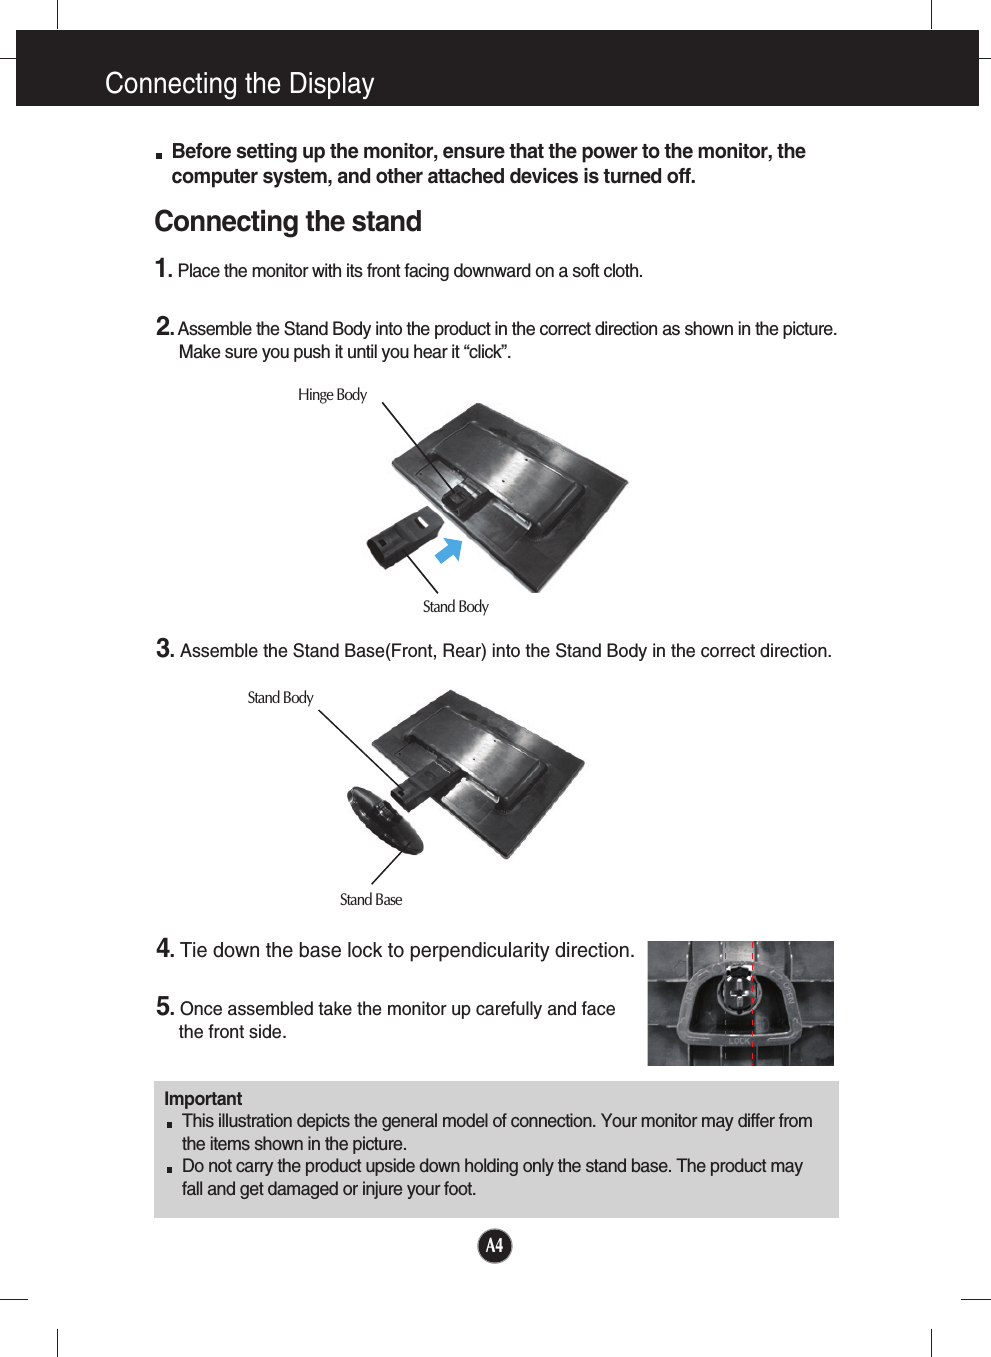 A4Connecting the DisplayImportantThis illustration depicts the general model of connection. Your monitor may differ fromthe items shown in the picture.Do not carry the product upside down holding only the stand base. The product mayfall and get damaged or injure your foot.Before setting up the monitor, ensure that the power to the monitor, thecomputer system, and other attached devices is turned off.Connecting the stand 1.Place the monitor with its front facing downward on a soft cloth.2.Assemble the Stand Body into the product in the correct direction as shown in the picture. Make sure you push it until you hear it “click”.3.Assemble the Stand Base(Front, Rear) into the Stand Body in the correct direction.4.Tie down the base lock to perpendicularity direction.5.Once assembled take the monitor up carefully and facethe front side.Stand BodyStand BaseStand BodyHinge Body